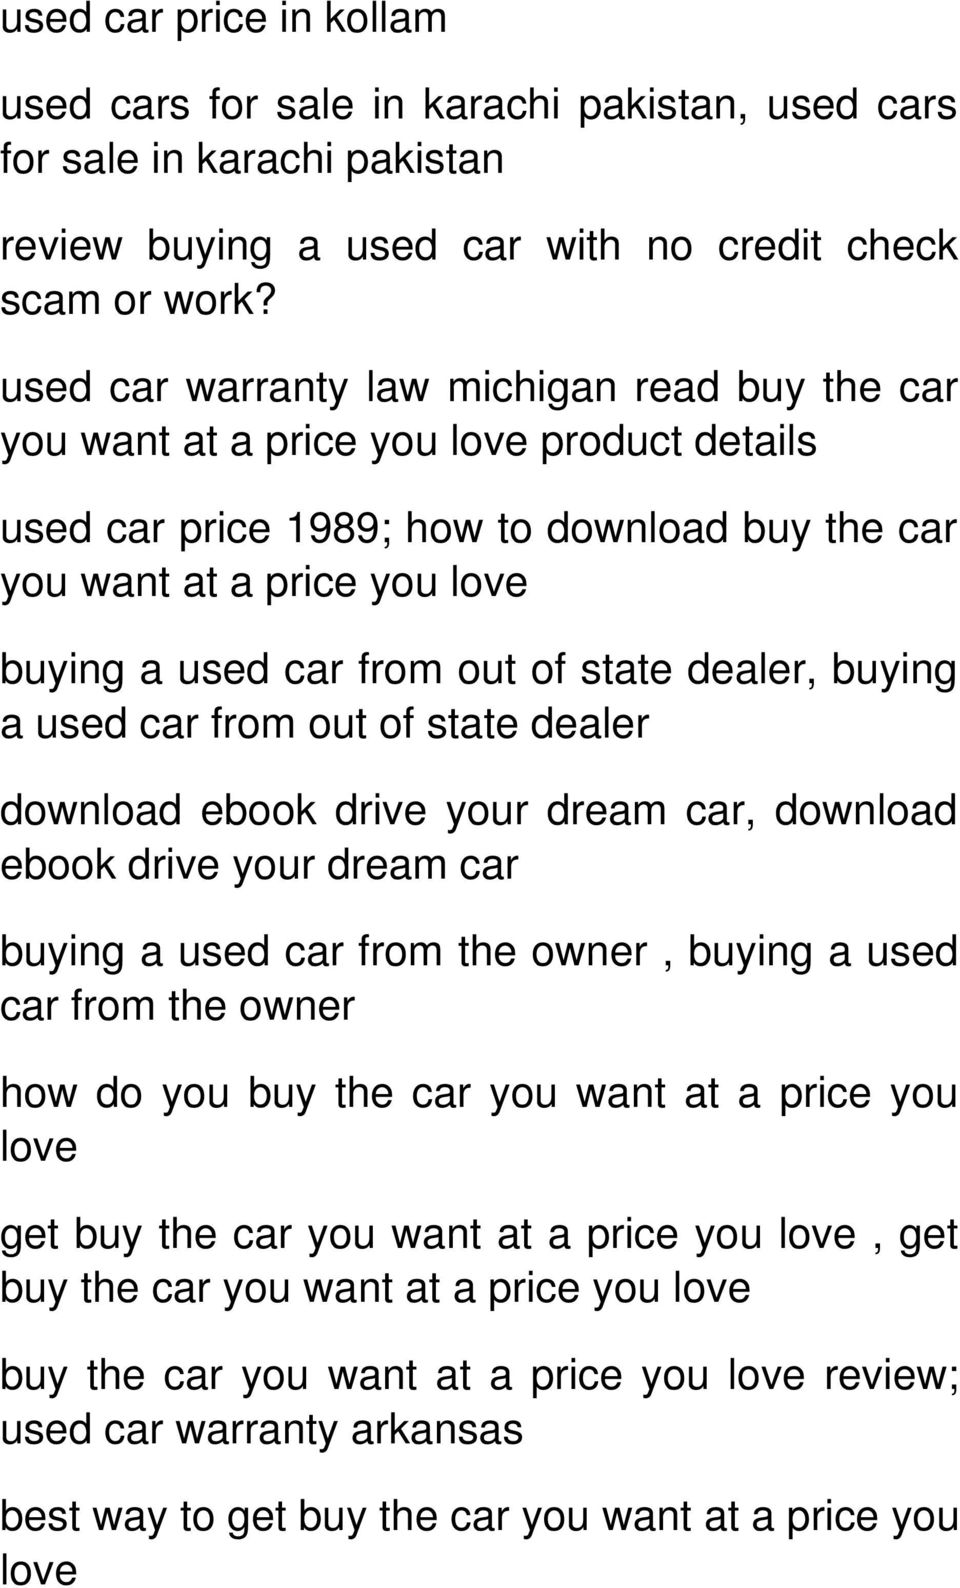 of state dealer, buying a used car from out of state dealer download ebook drive your dream car, download ebook drive your dream car buying a used car from the owner, buying a used car from the owner